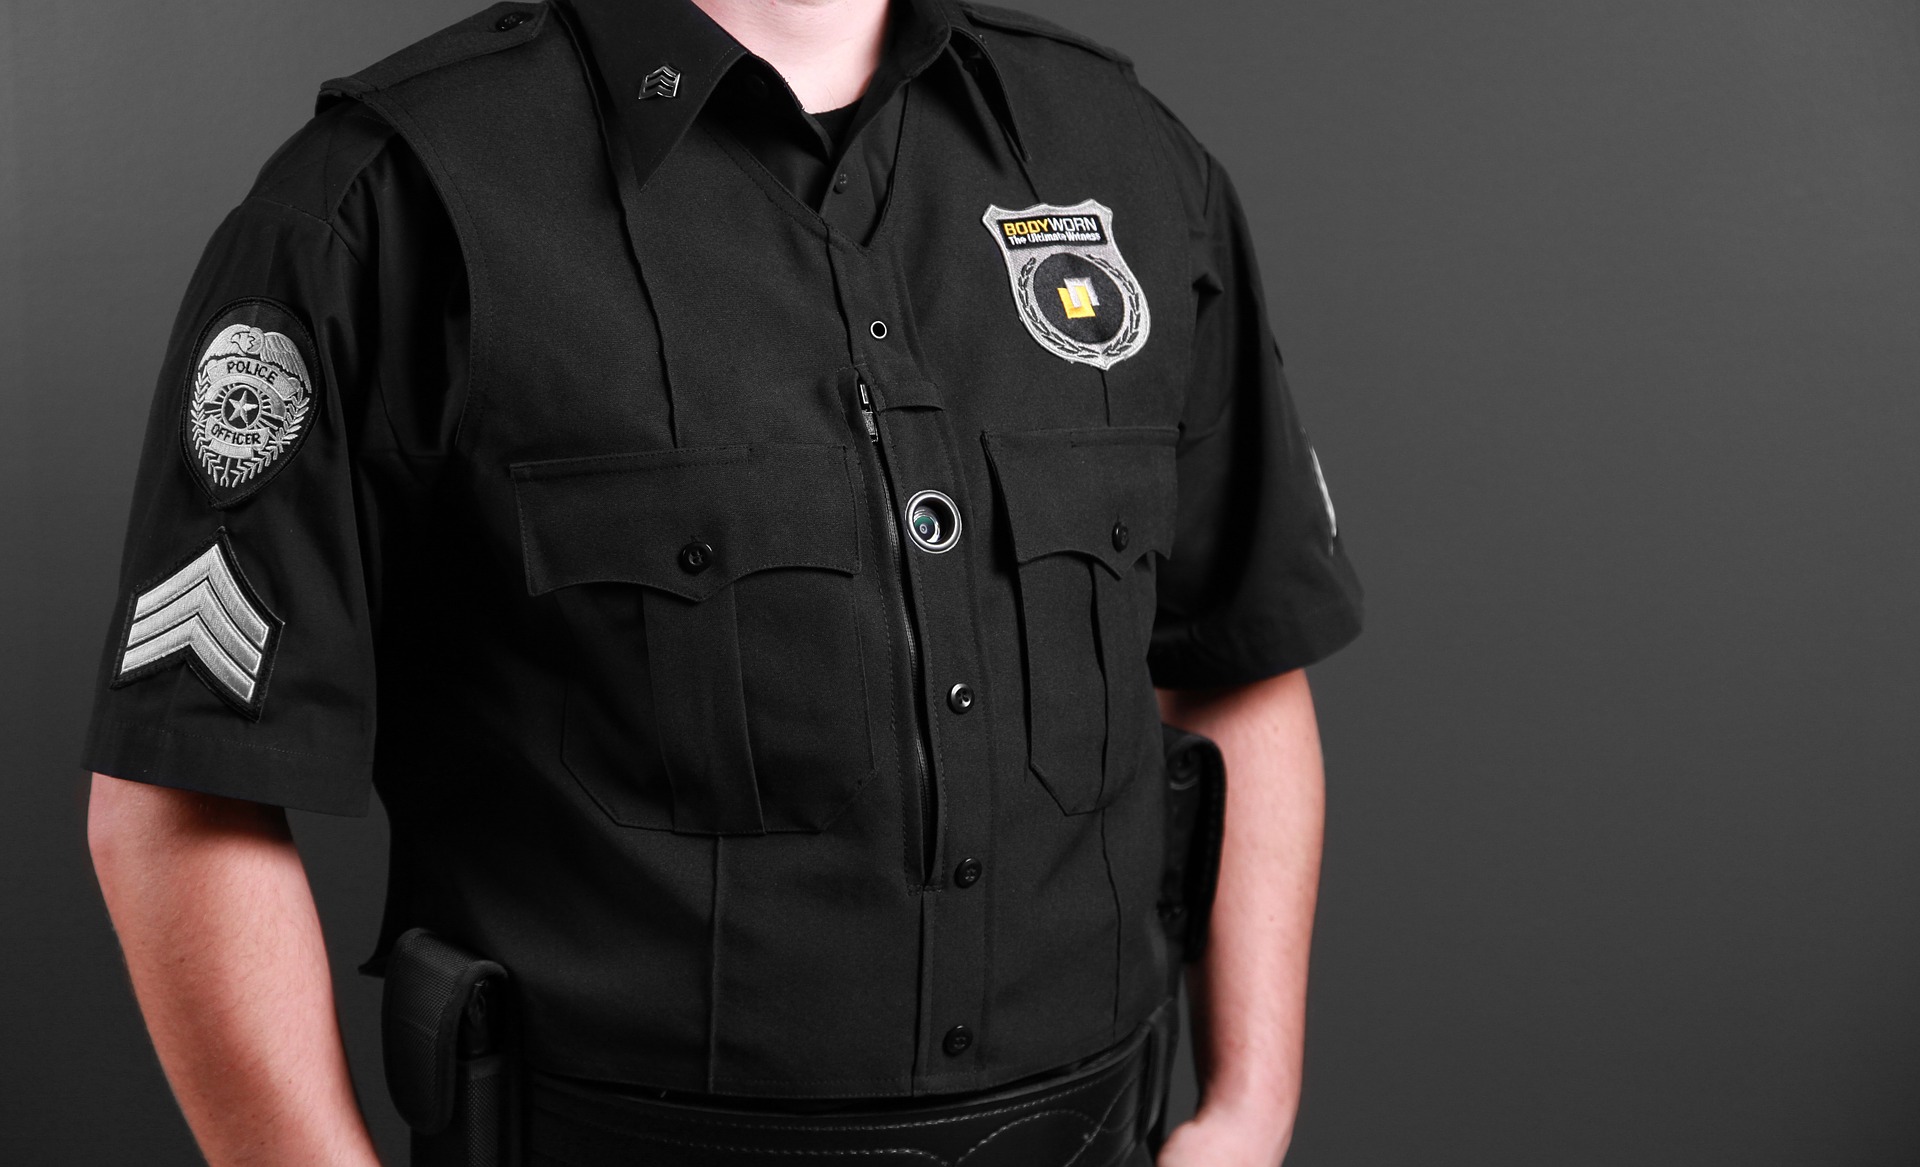 Police Body Cams – Do We Have Privacy Rights?